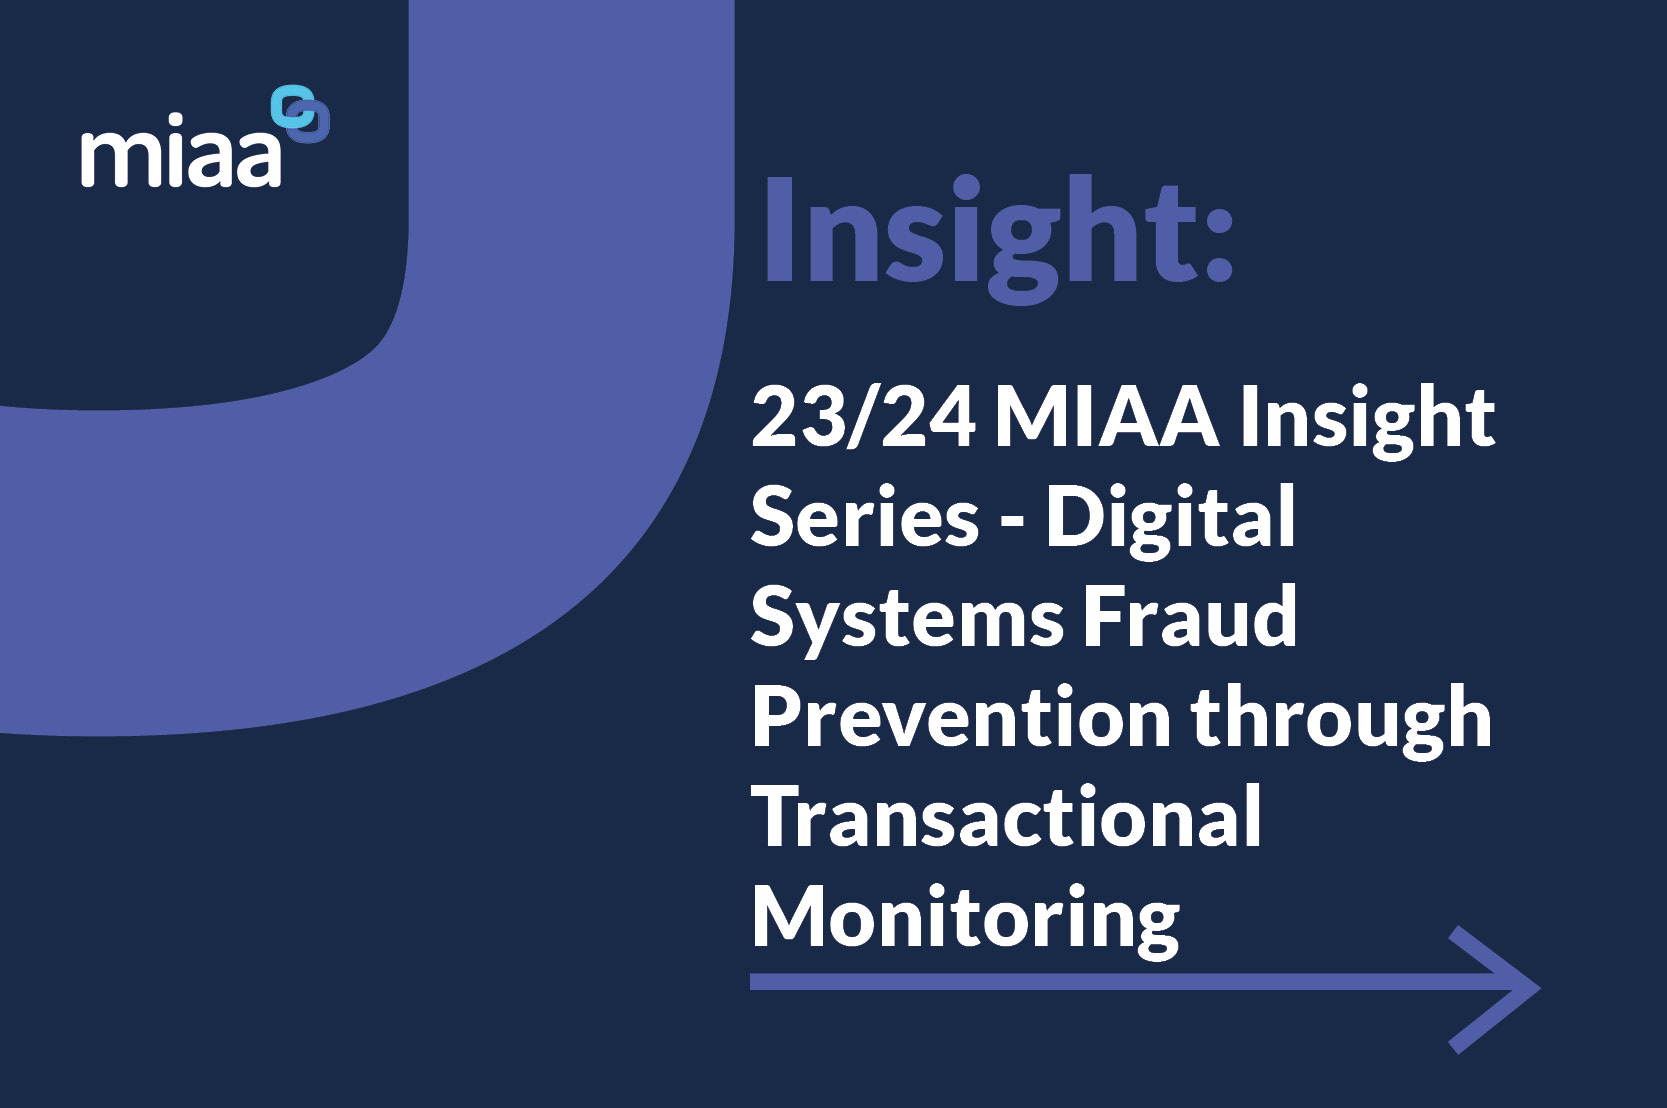 23/24 MIAA Insight Series - Digital Systems Fraud Prevention through Transactional Monitoring